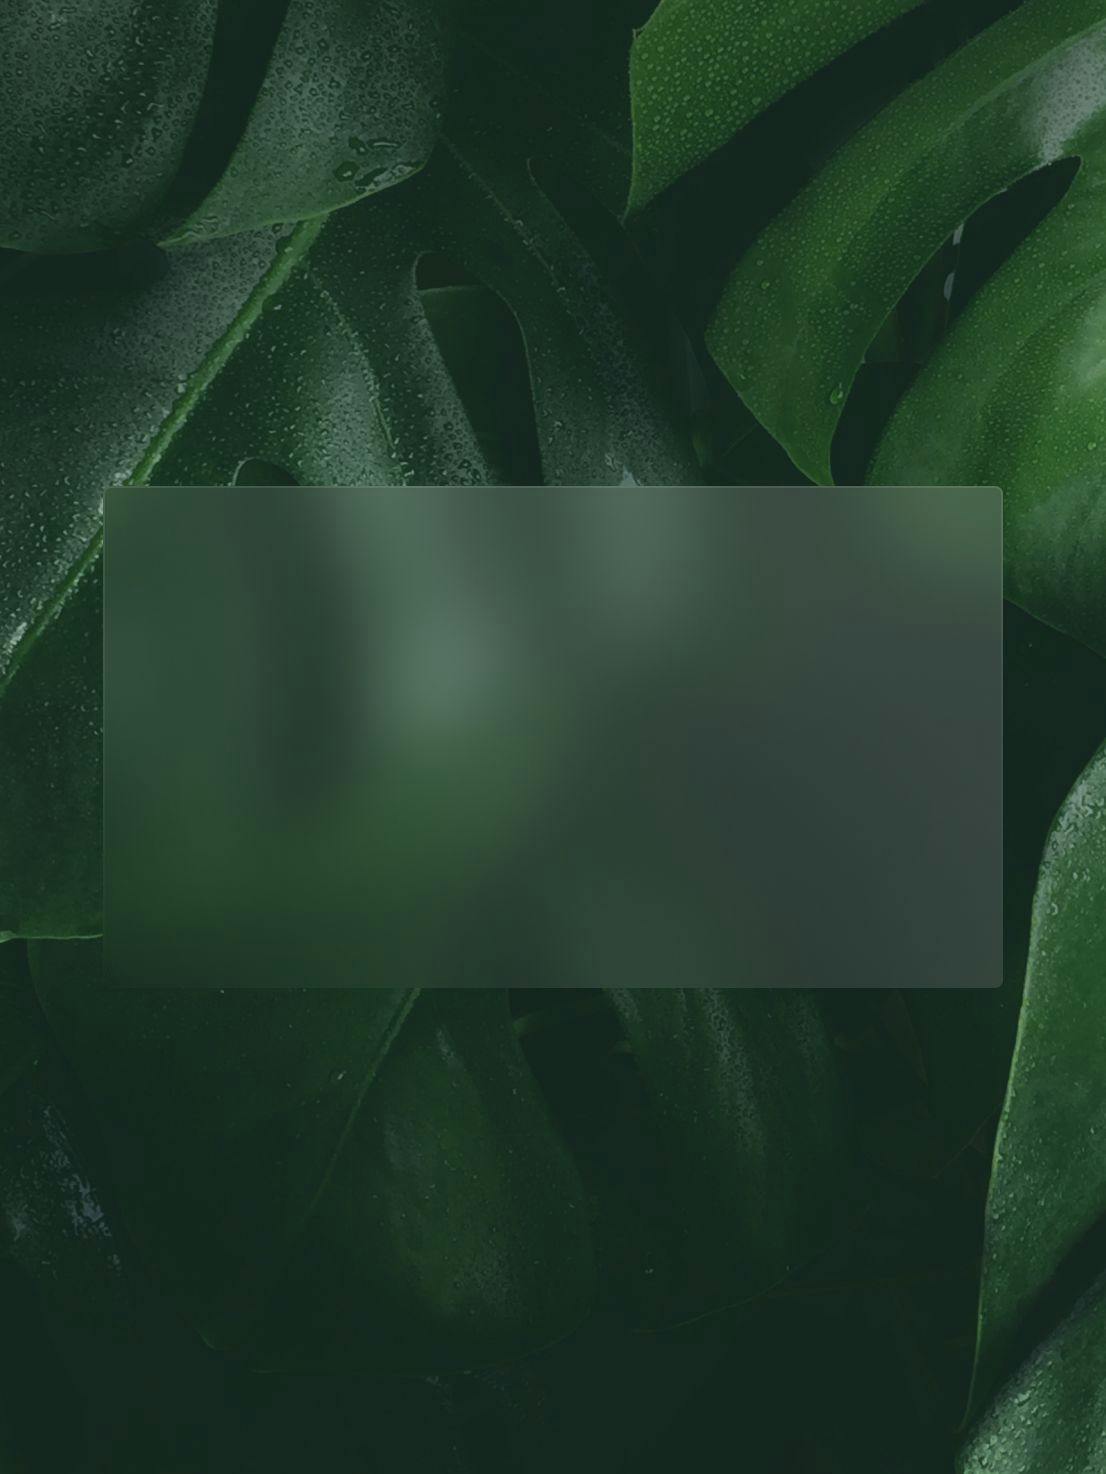 Green leaves background with see through glass rectangle